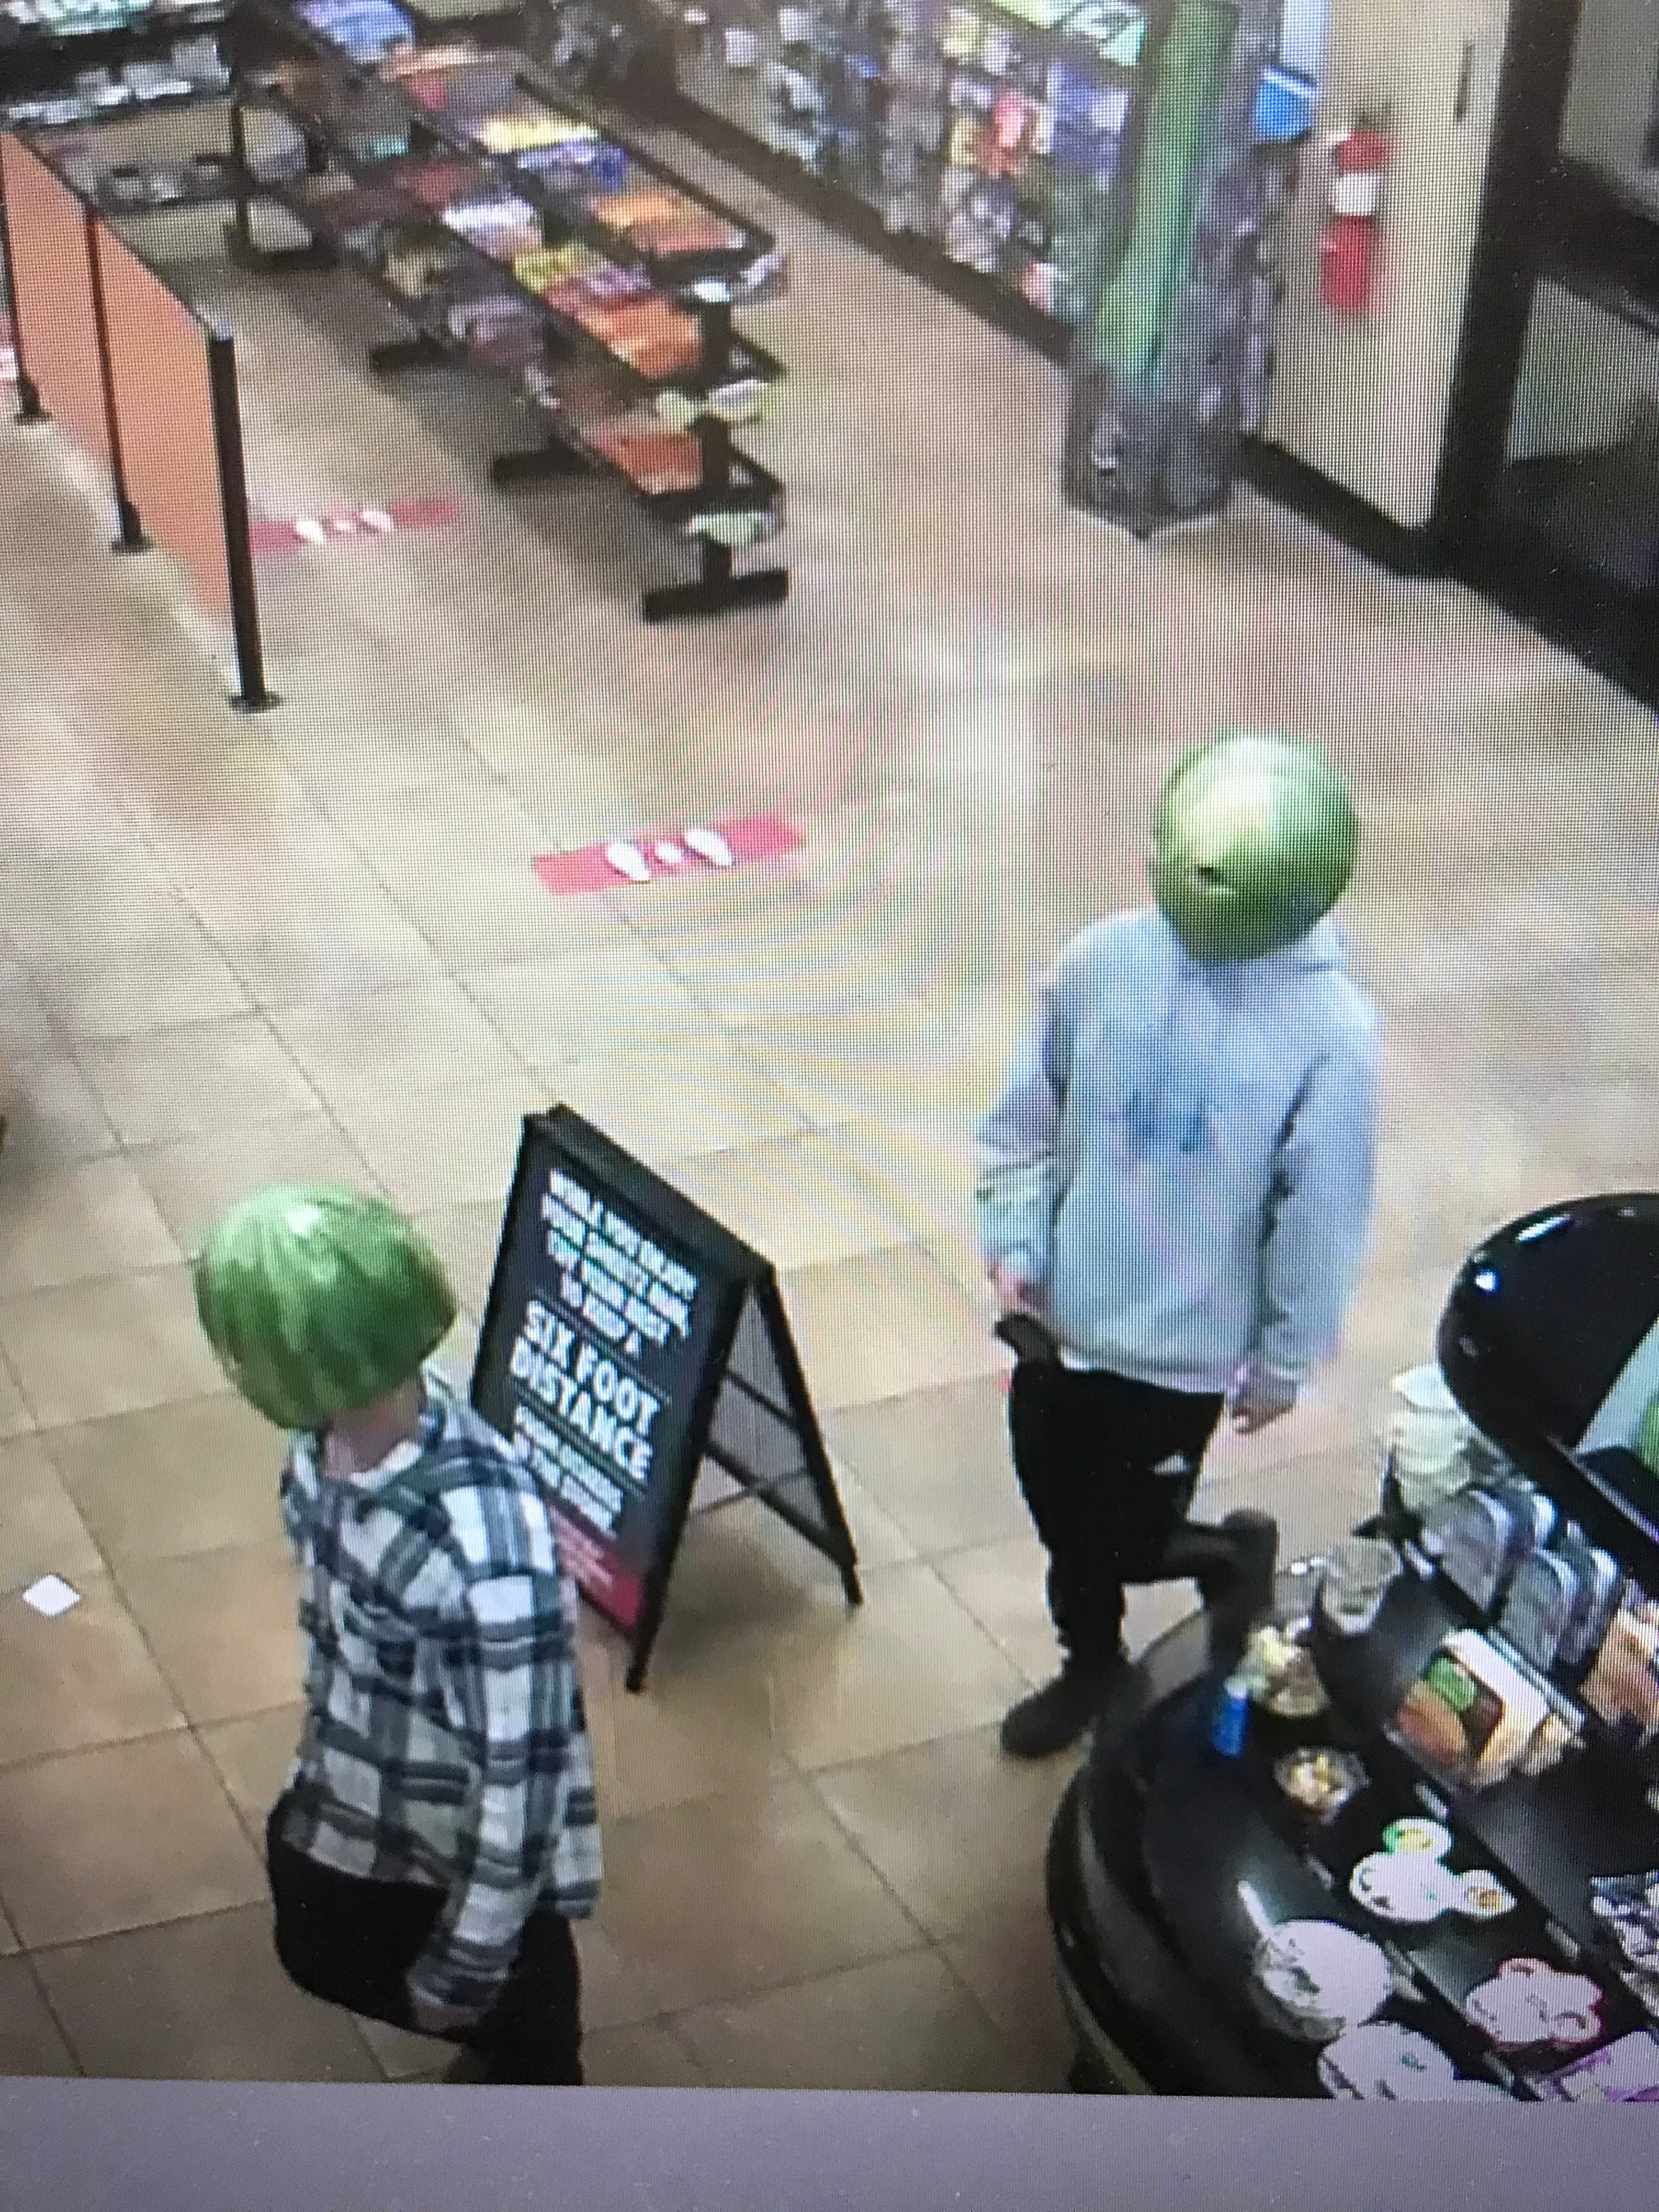 Man who wore watermelon mask during convenience store theft arrested